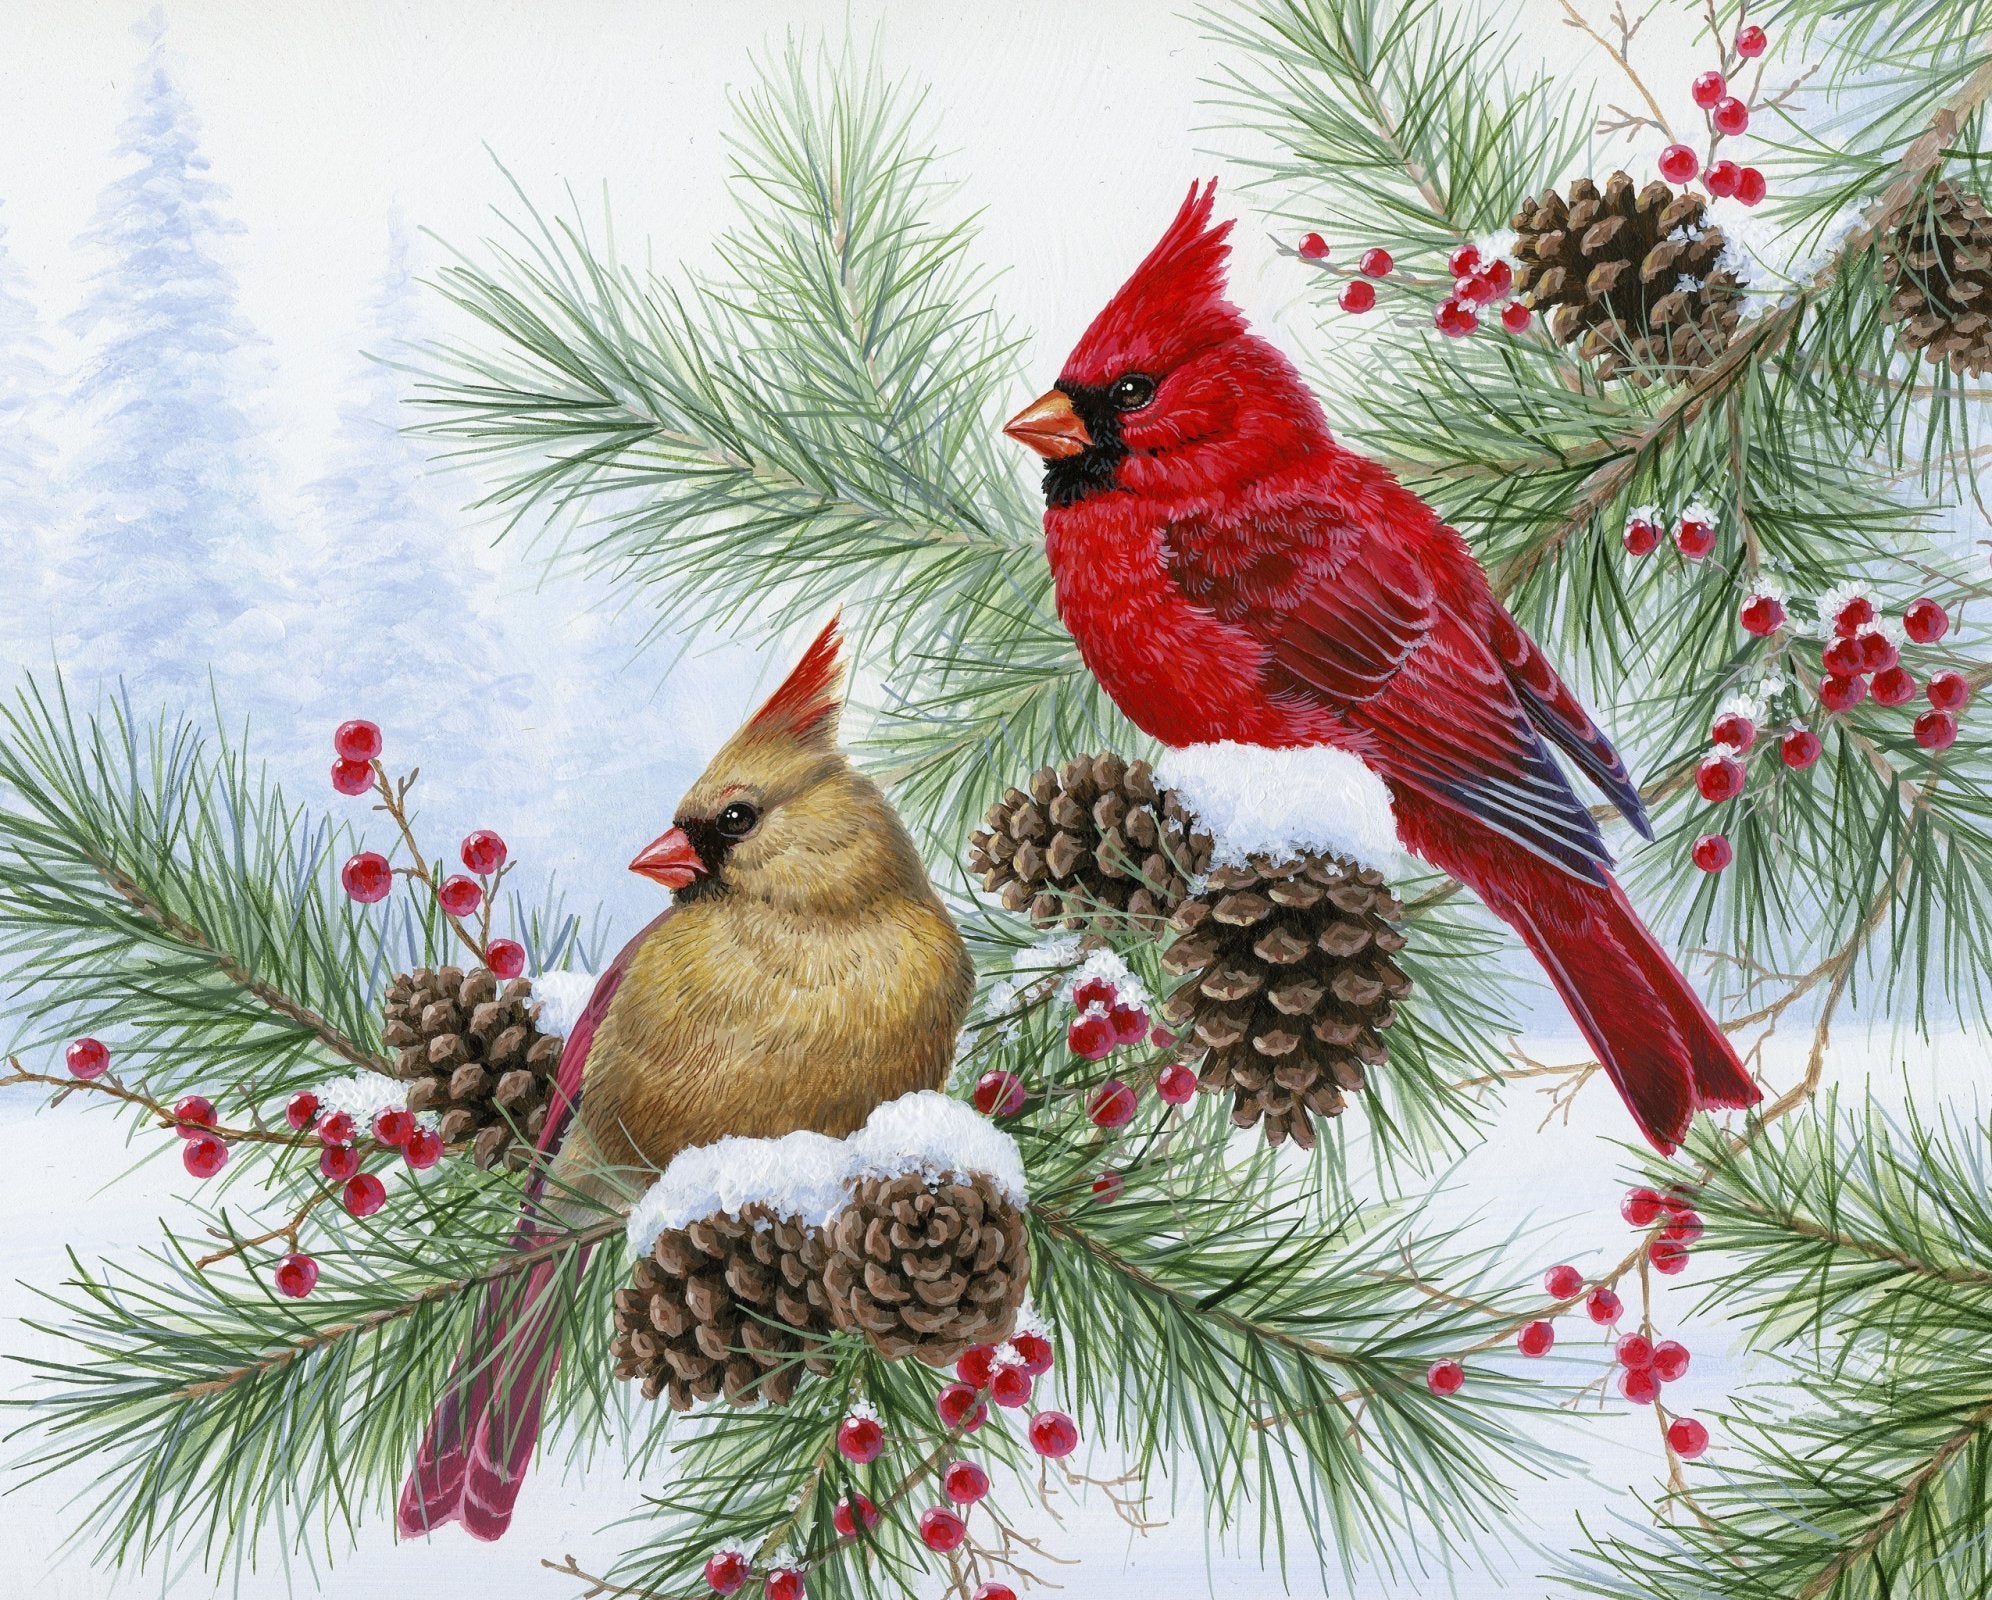 This fabric panel features a magnificent pair of cardinals perched on snow-ladened evergreen branches with pinecones and red berries